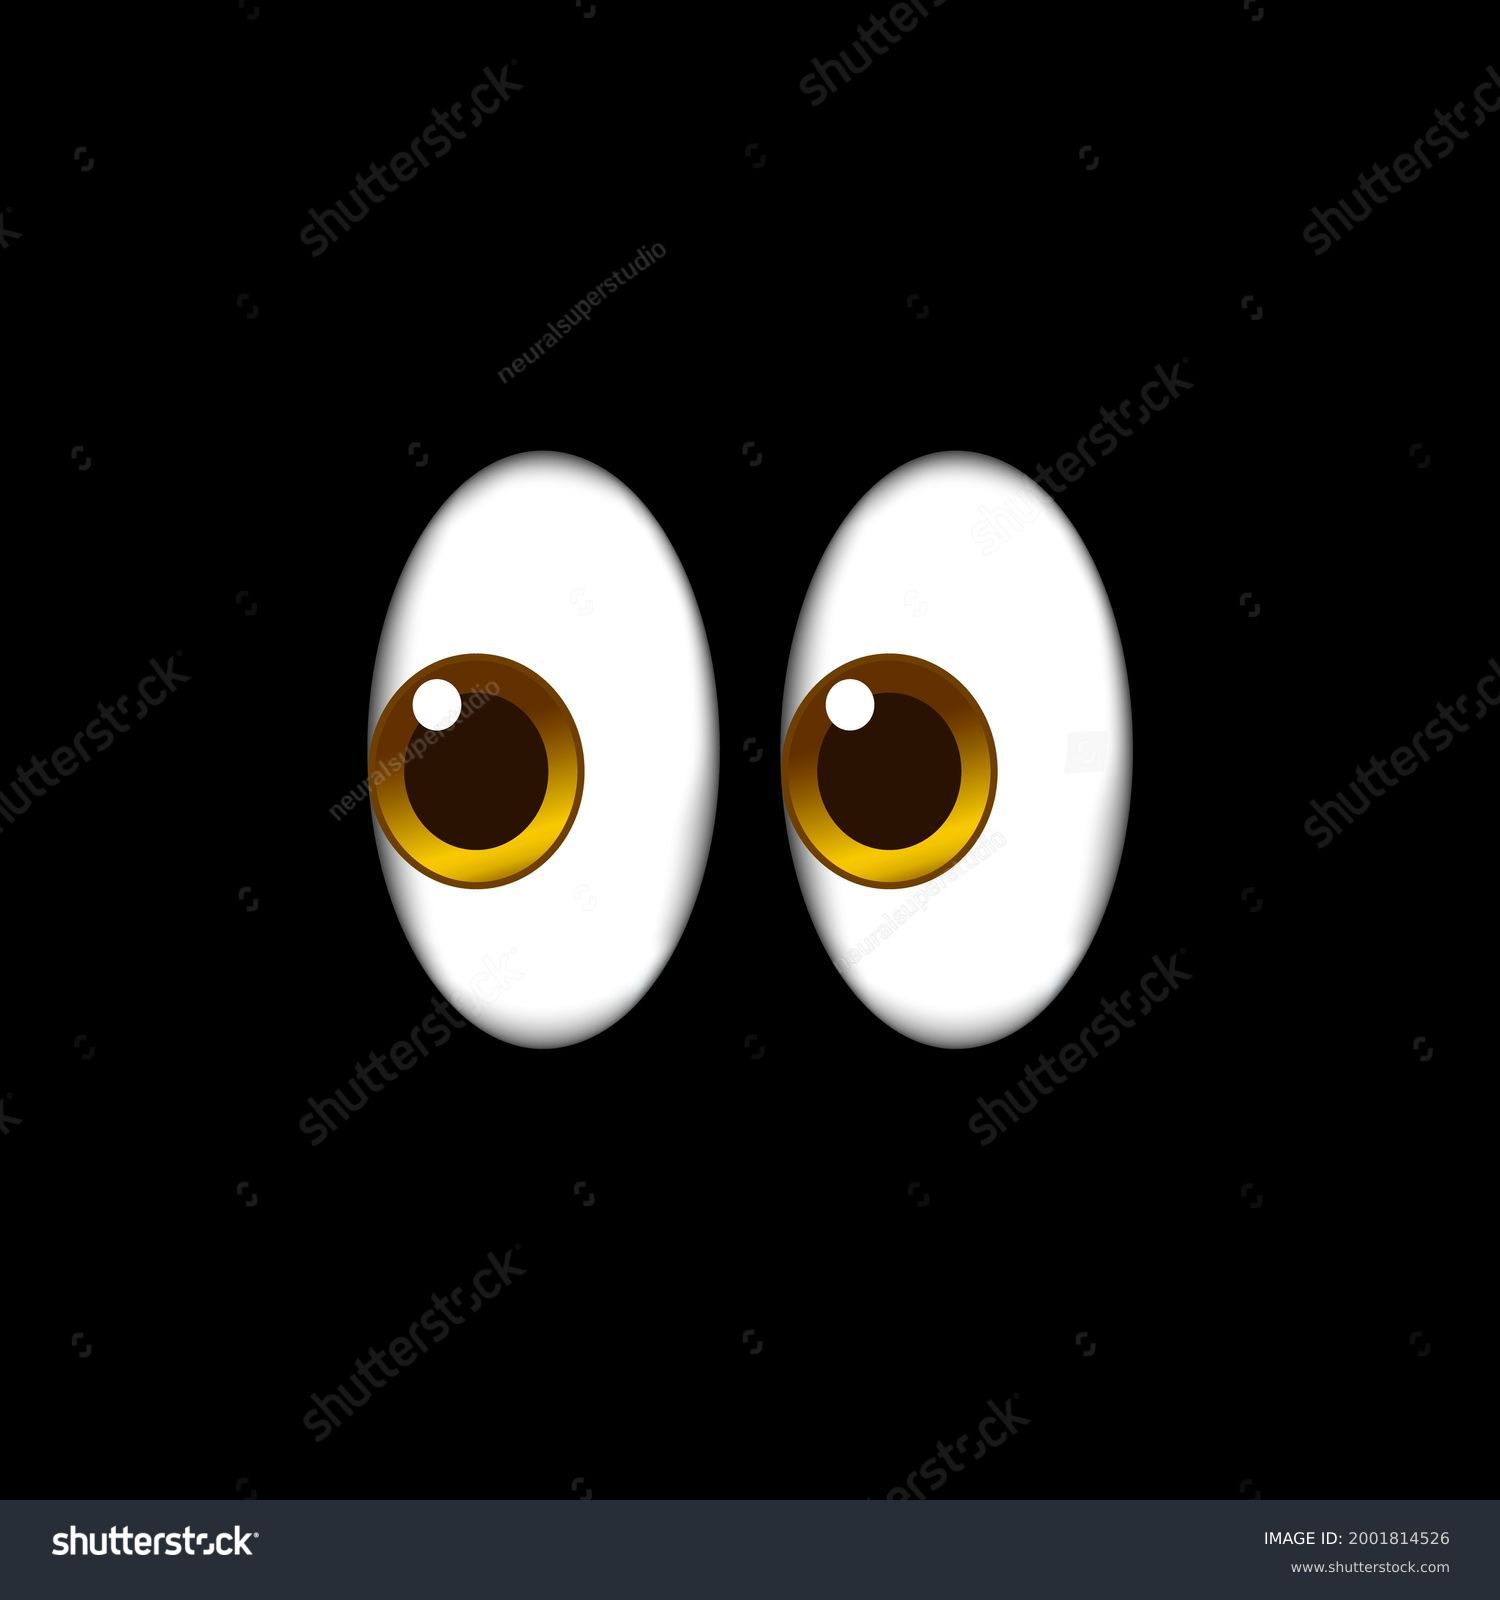 two eyes emoji. mysterious funny eyes. isolated in black background vector illustration #2001814526